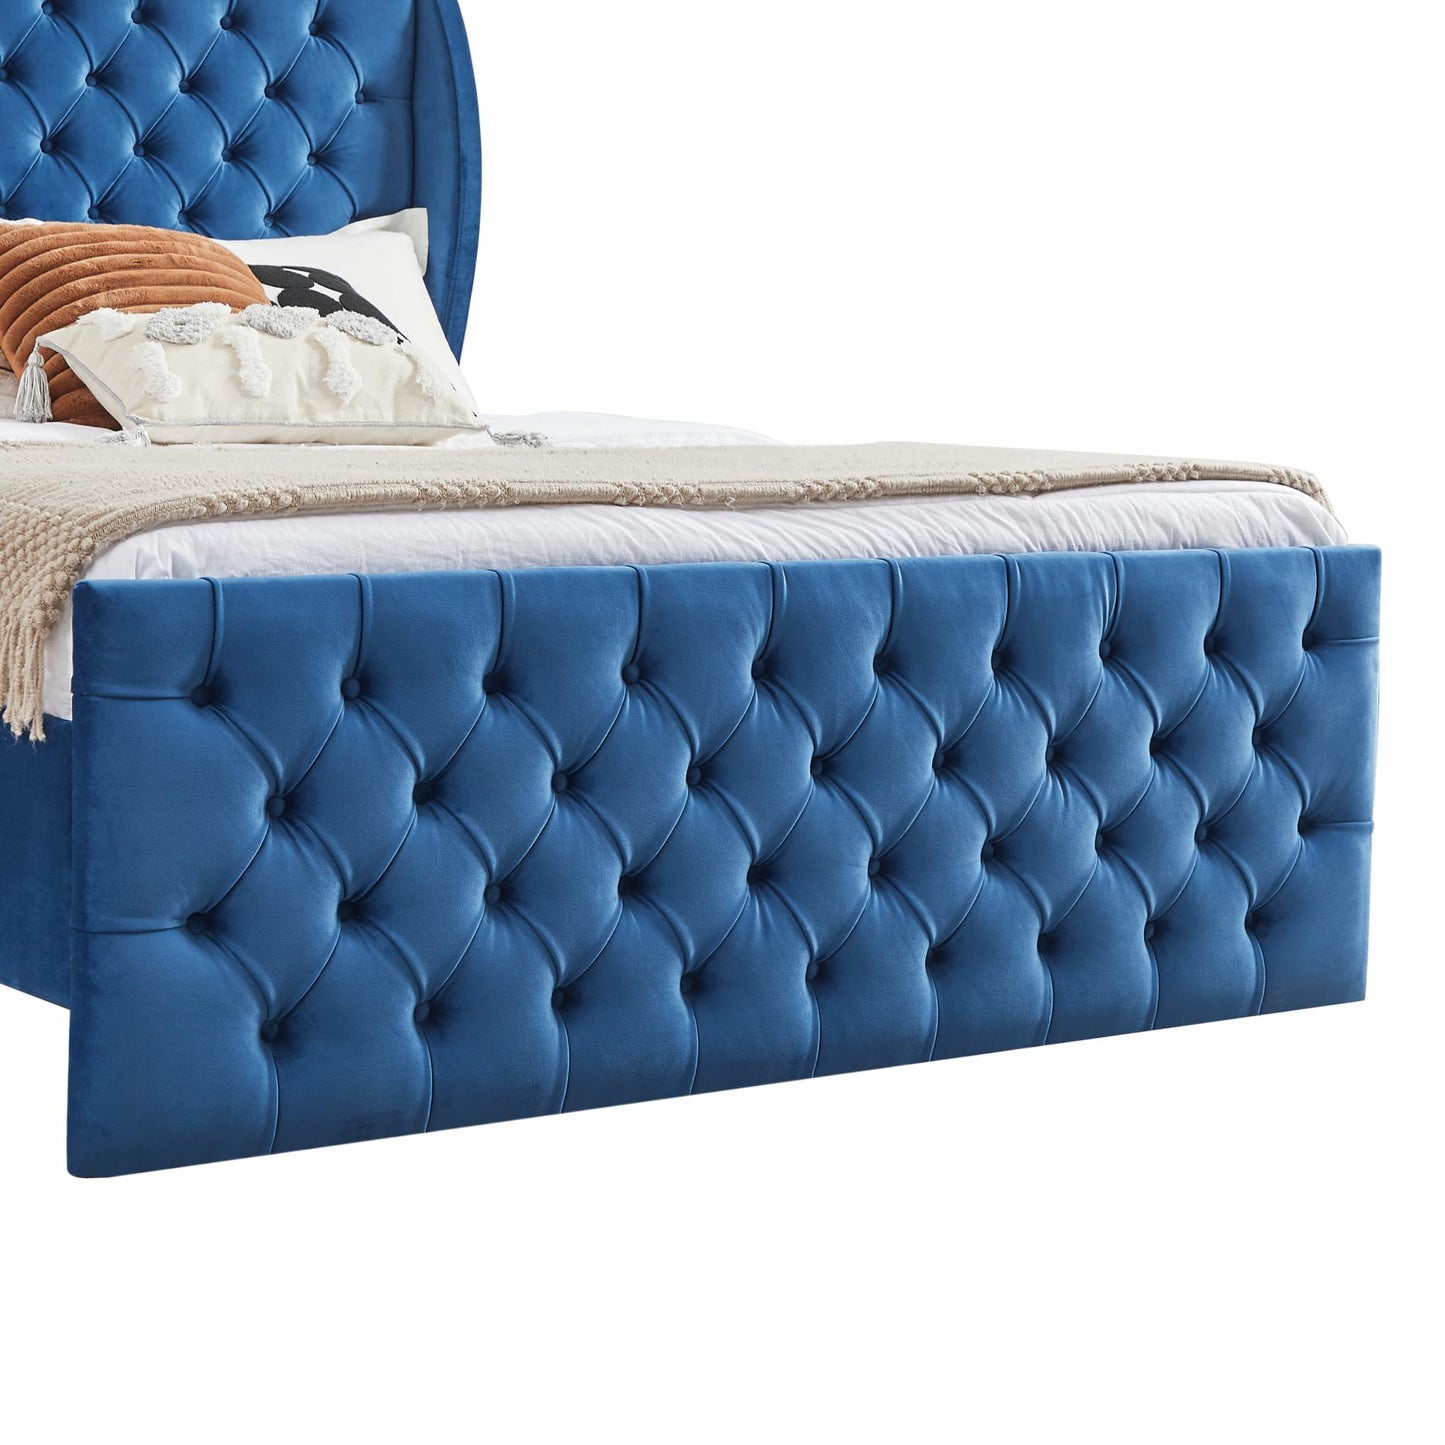 Queen Size Chesterfield Tufted Bed